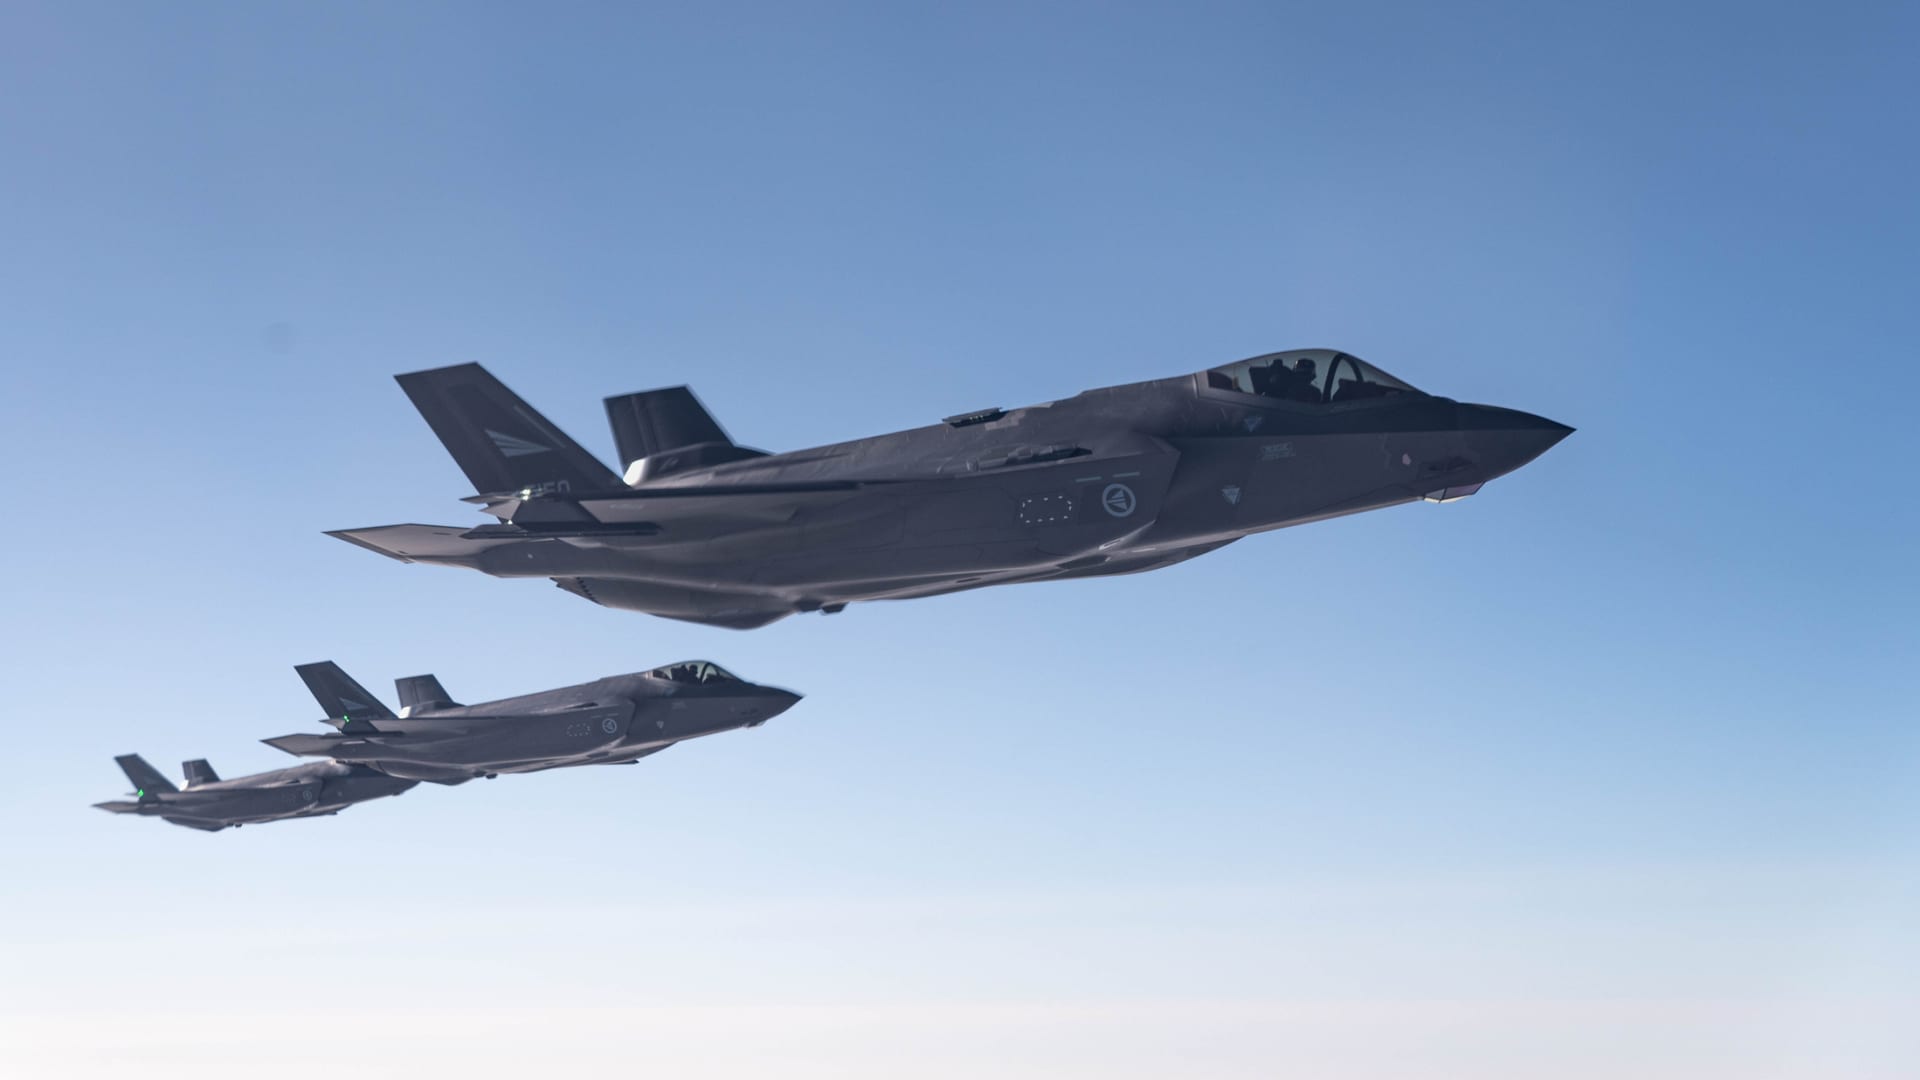 Norwegian F-35 in close formation.